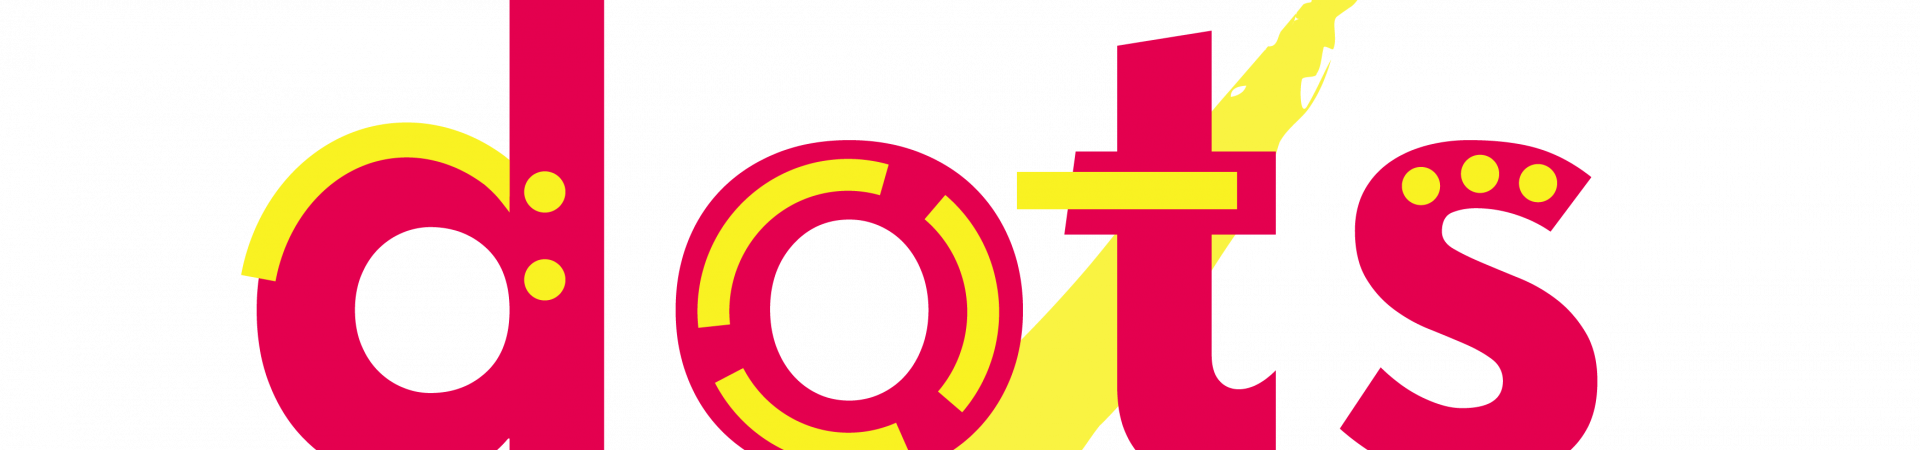 the logo of dots. the impact summit